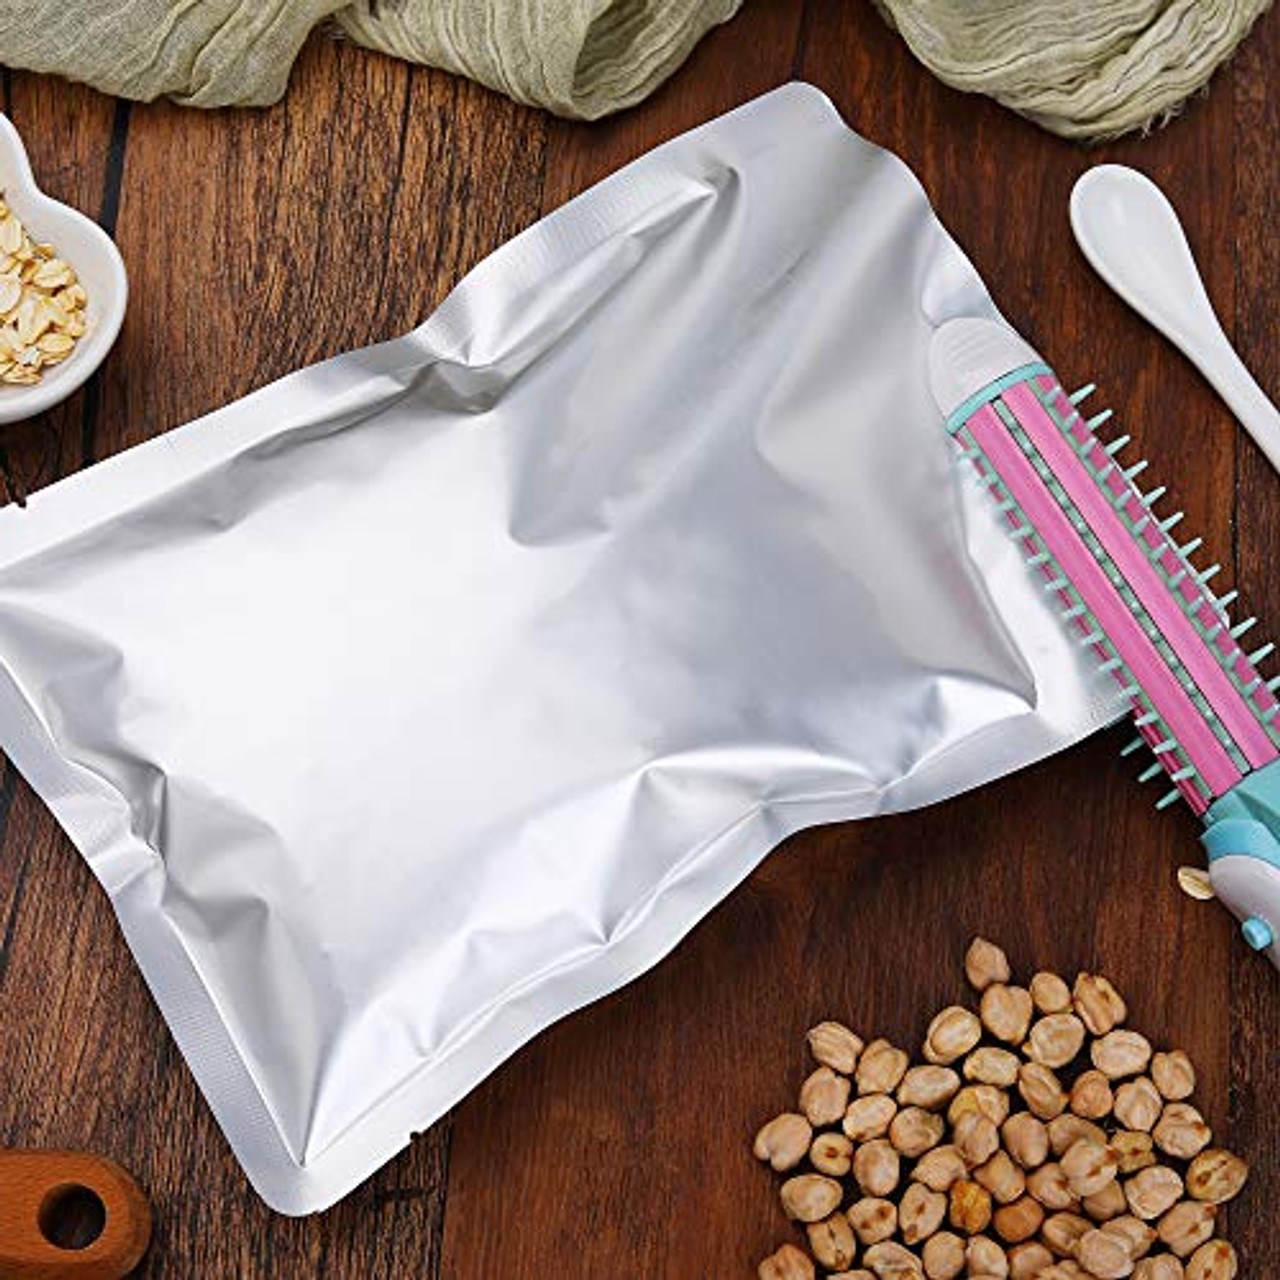 2 Gallon Reclosable Poly Food Storage Bags